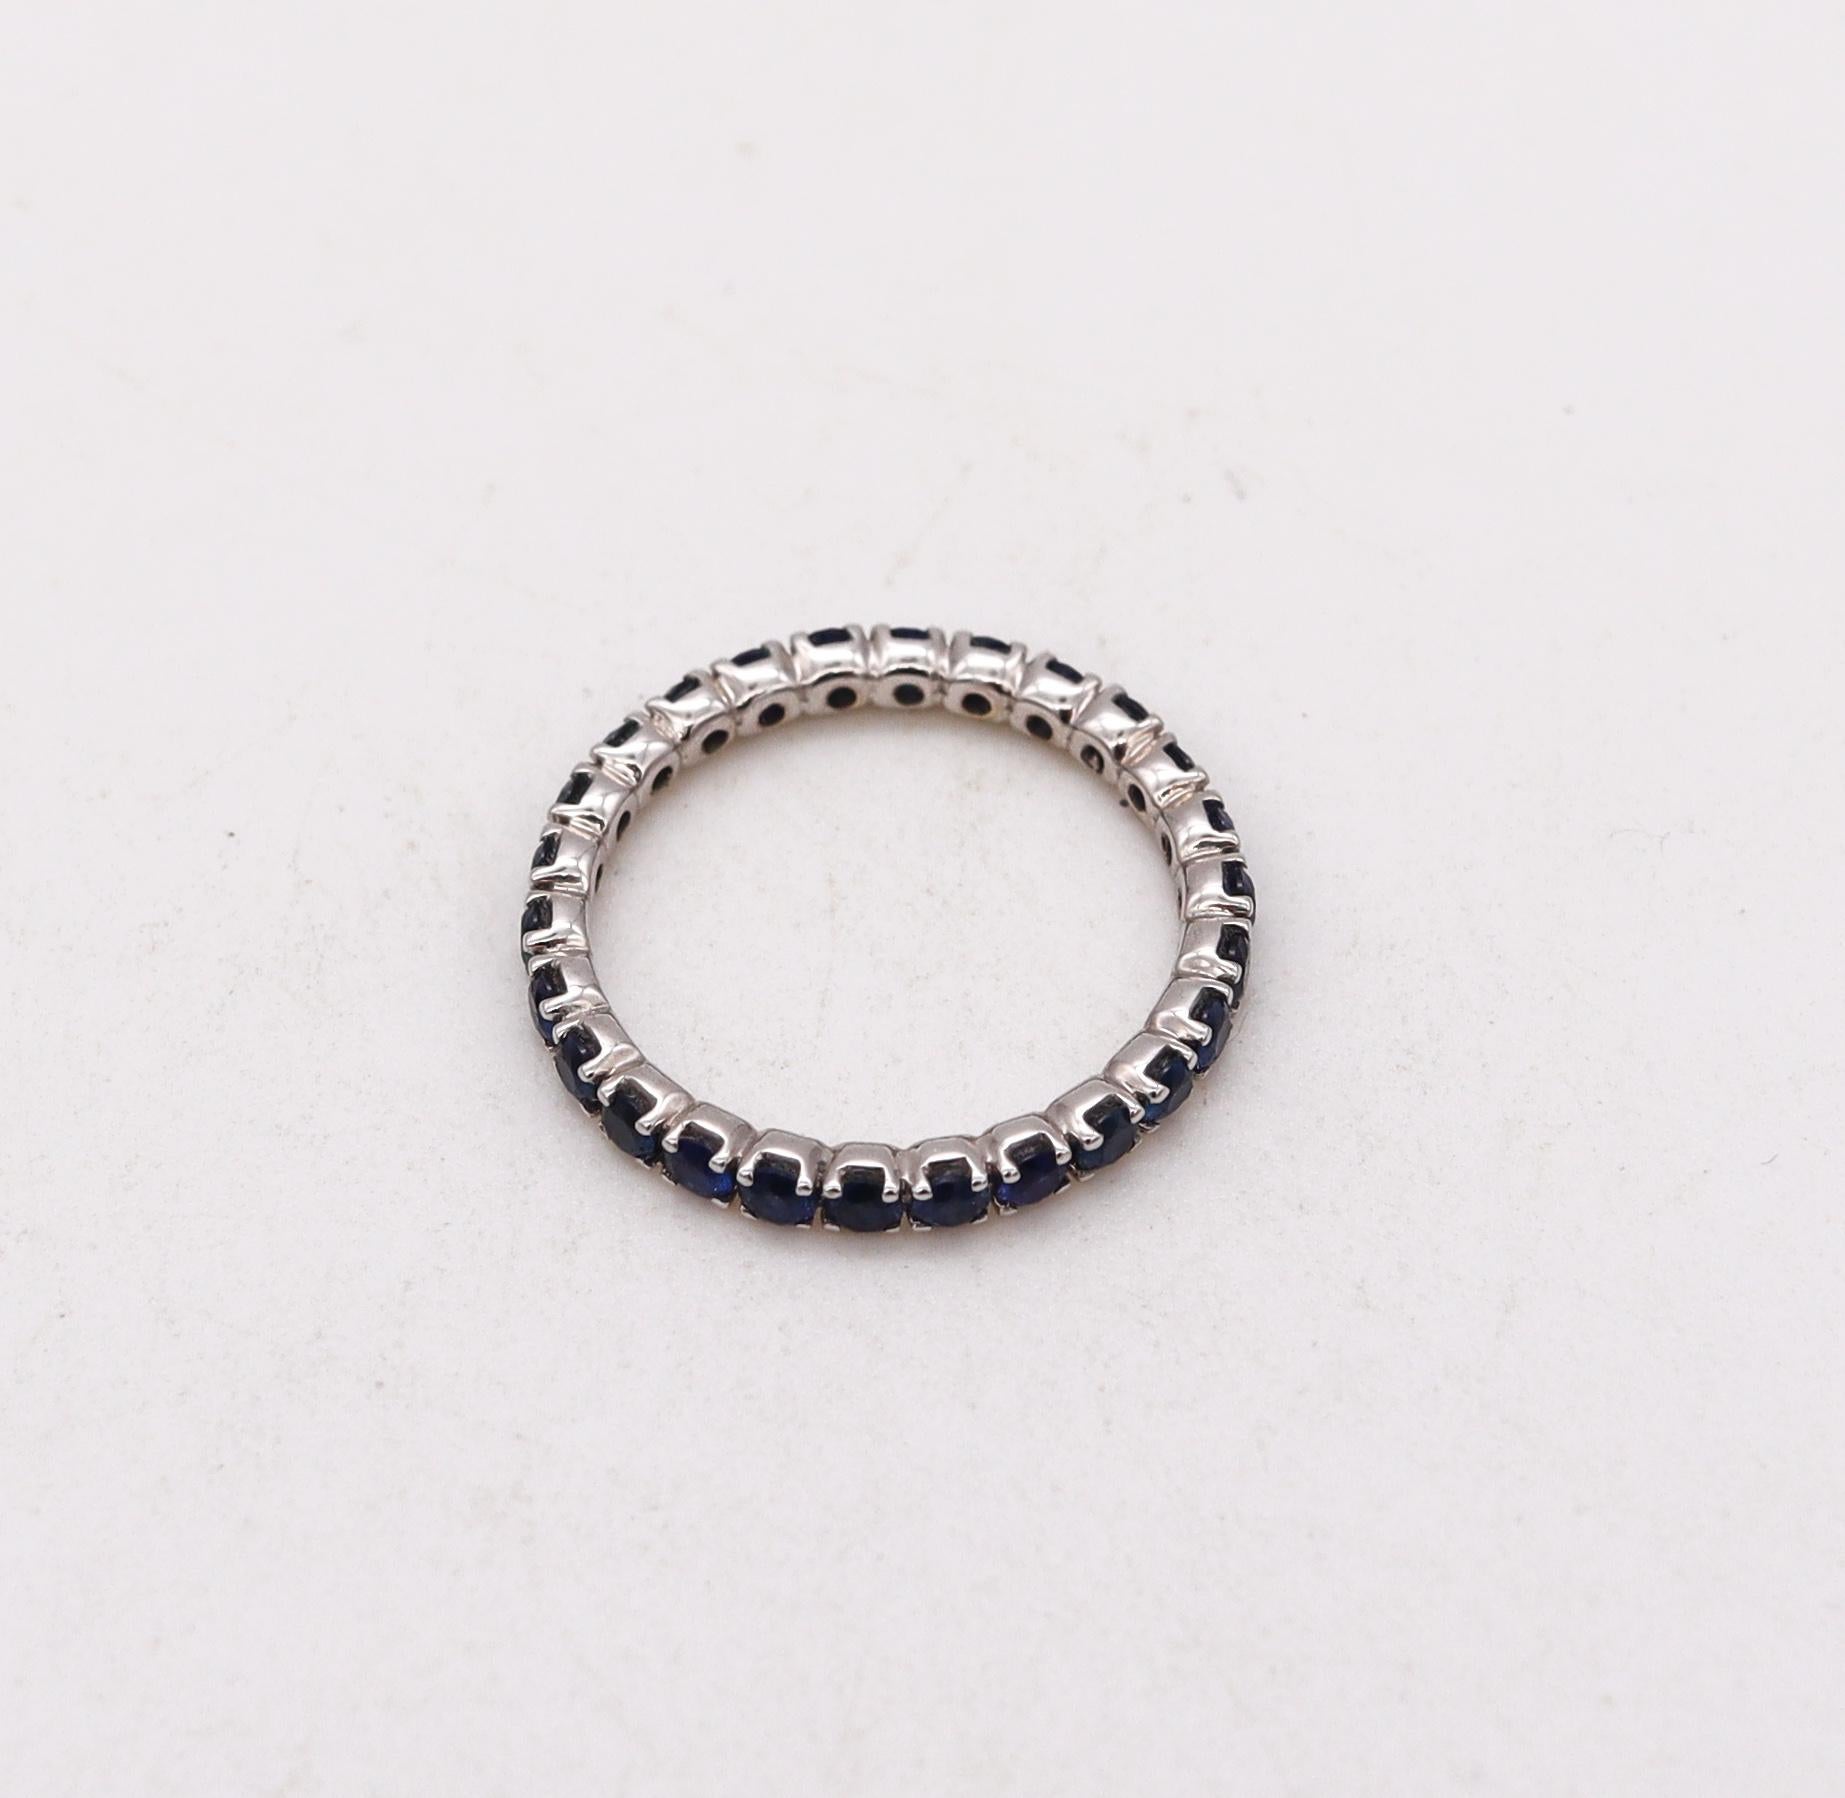 Eternity ring with Vivid Blue Sapphires.

Modern full band carefully crafted in solid white gold of 18 karats, with high polished finish. It is mounted in a single row of prongs, with 27 calibrated round brilliant cuts of Ceylon Blue Sapphires

The